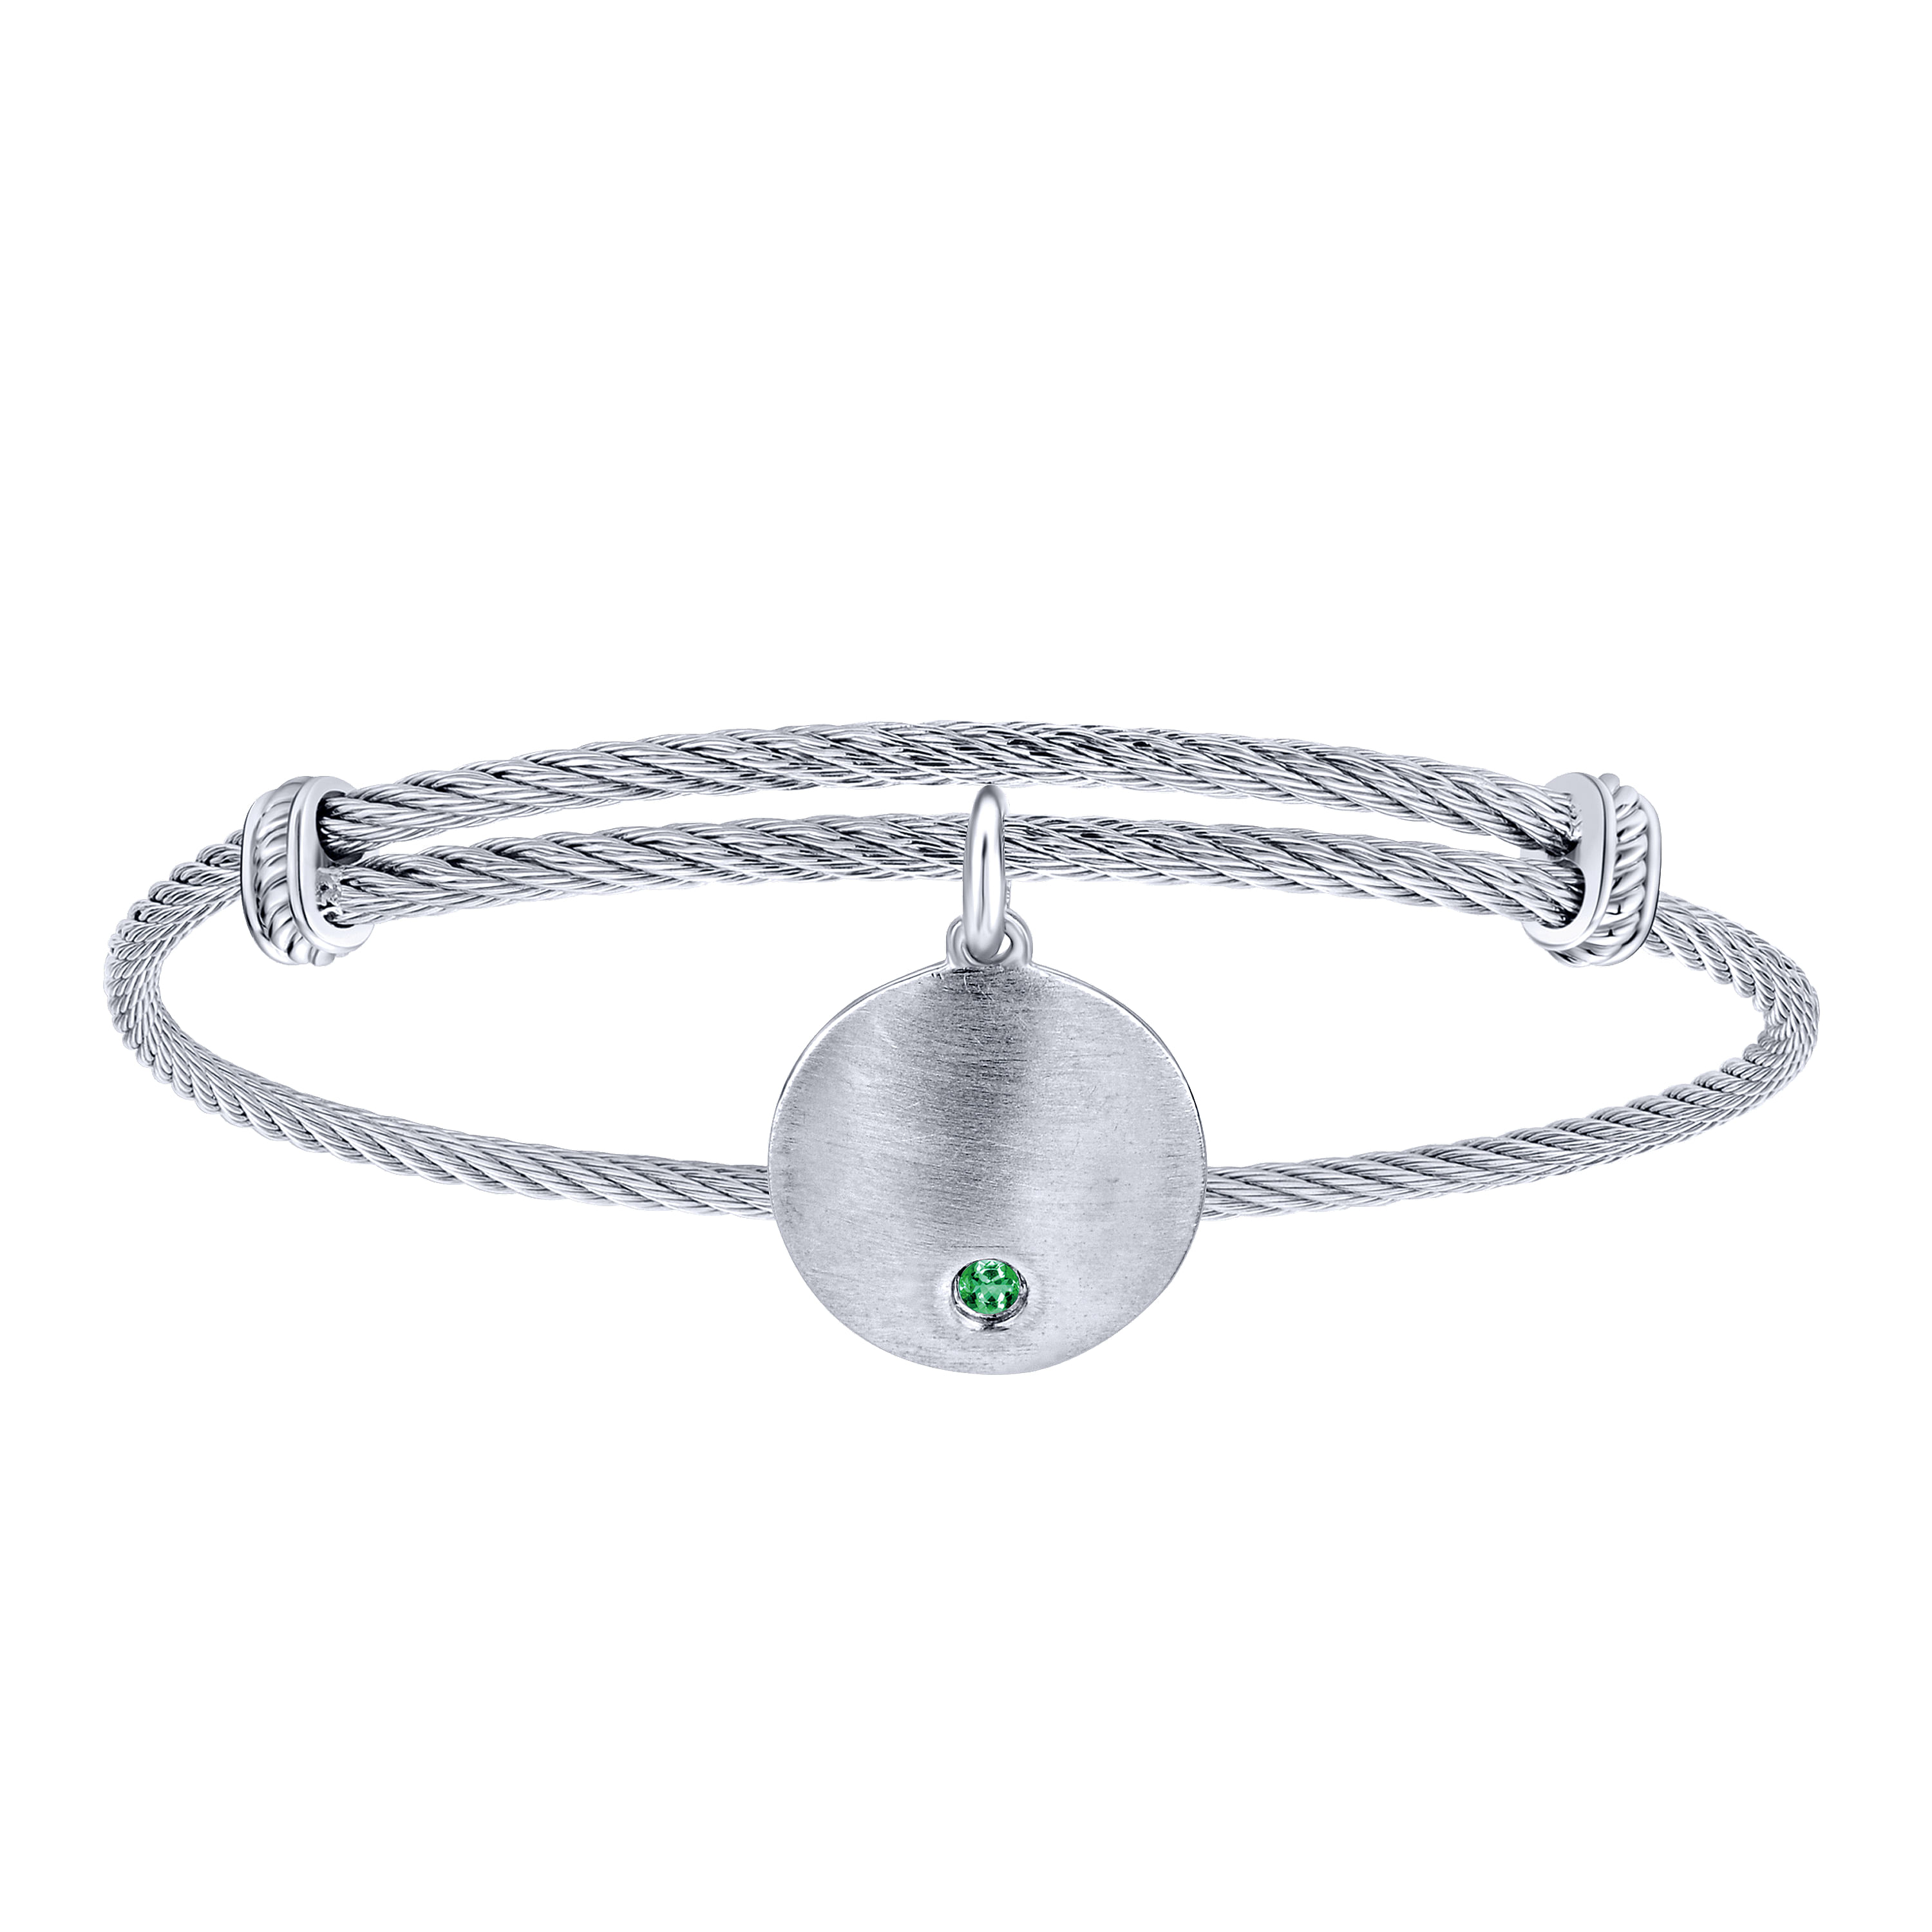 Adjustable Stainless Steel Bangle with Round Sterling Silver Emerald Stone Disc Charm